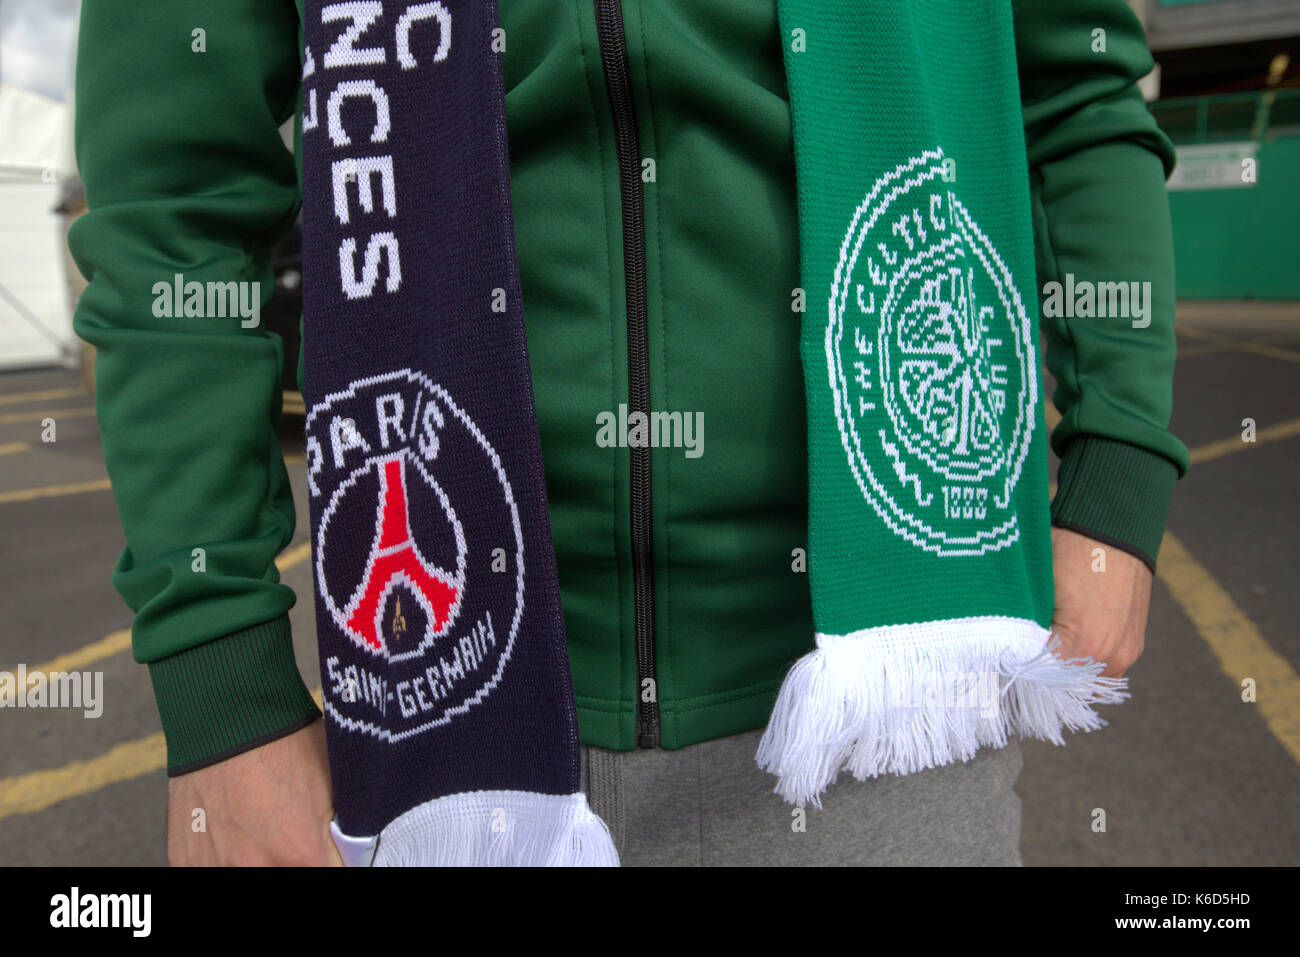 Glasgow, Scotland, UK. 12th Sep, 2017. Paris Saint-Germain Football Club, commonly known as PSG play Glasgow Celtic in the Champions league tonight The commemorative dual scarf . Credit: gerard ferry/Alamy Live News Stock Photo